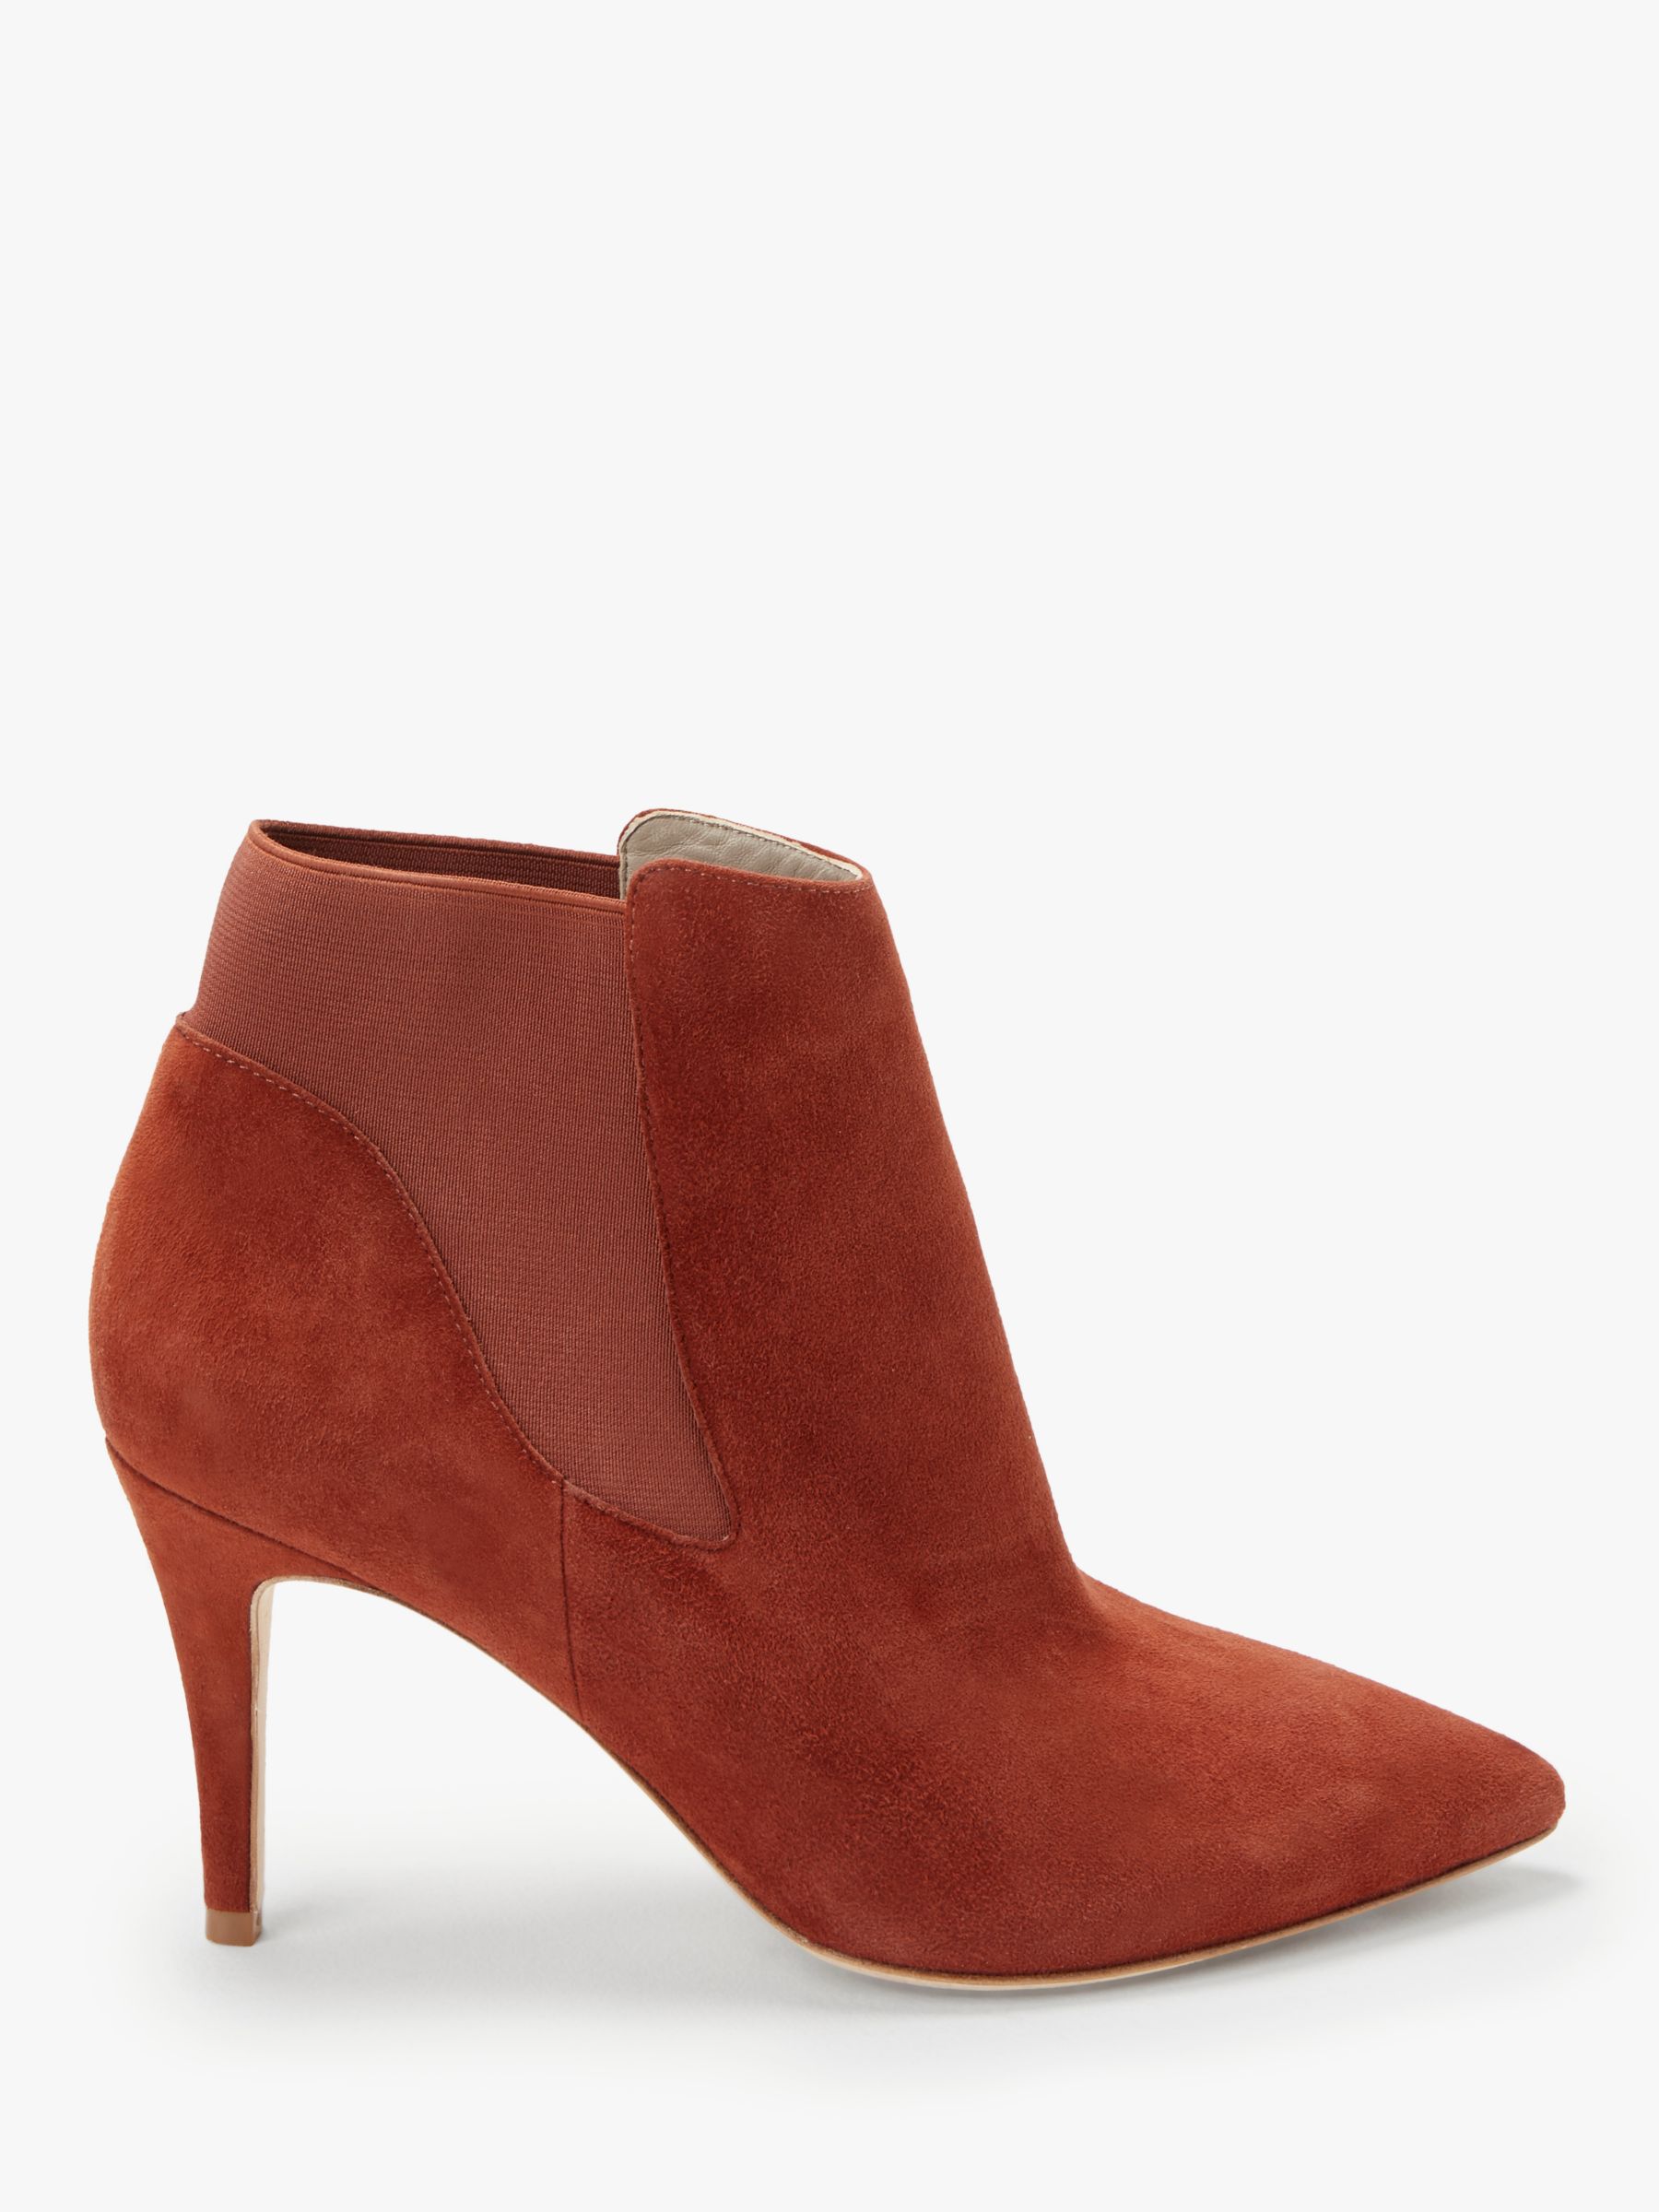 Boden Elsworth Stiletto Heel Ankle Boots, Conker Suede at John Lewis ...